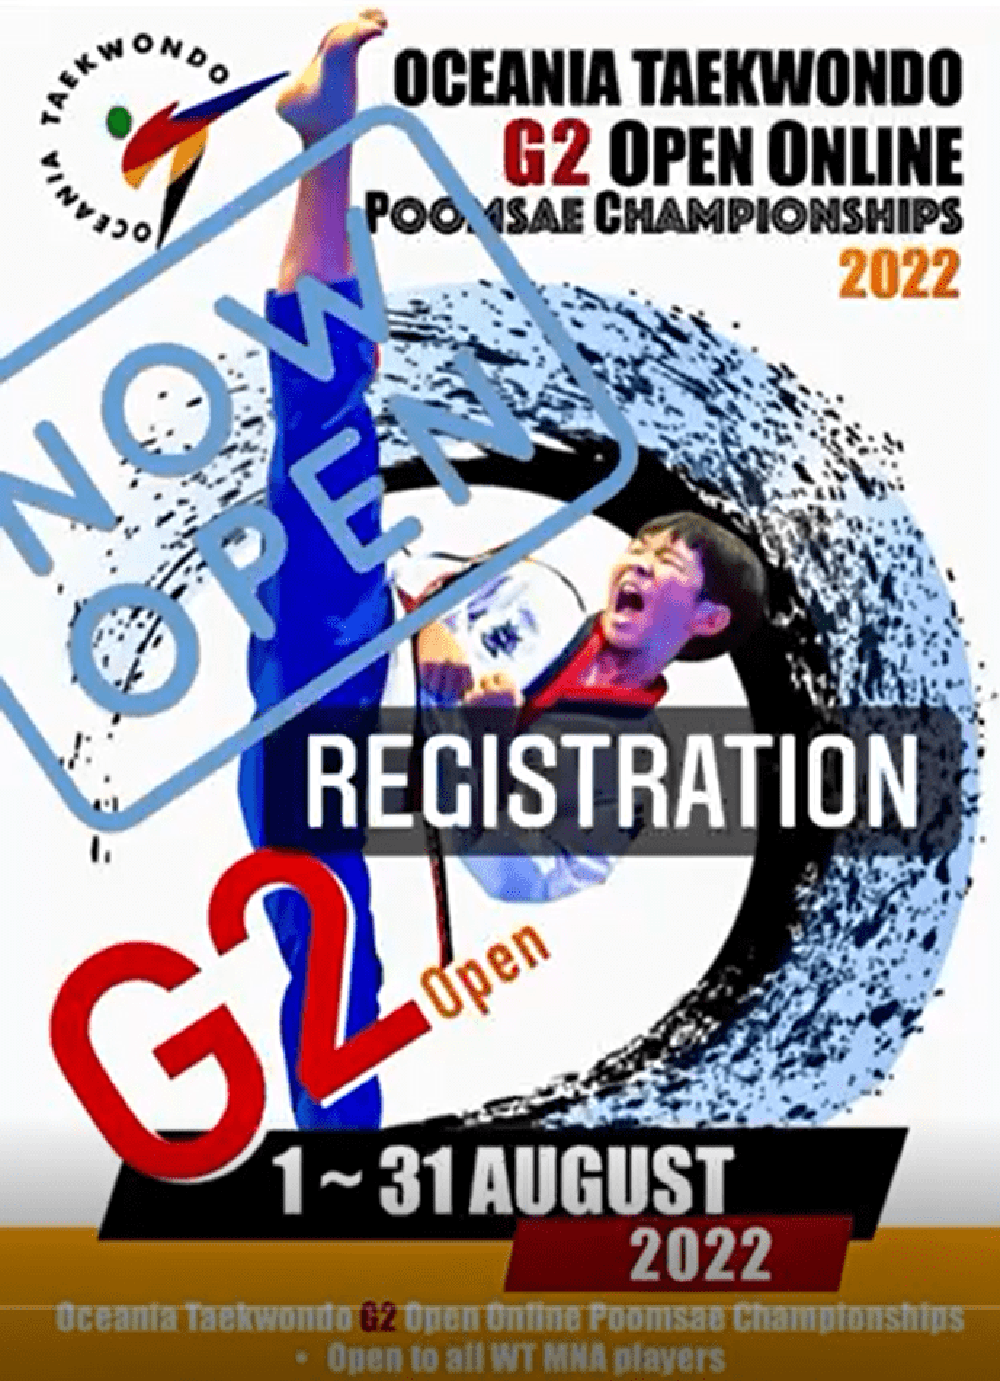 Oceania will have its Online Poomsae Championships G2 Open soon